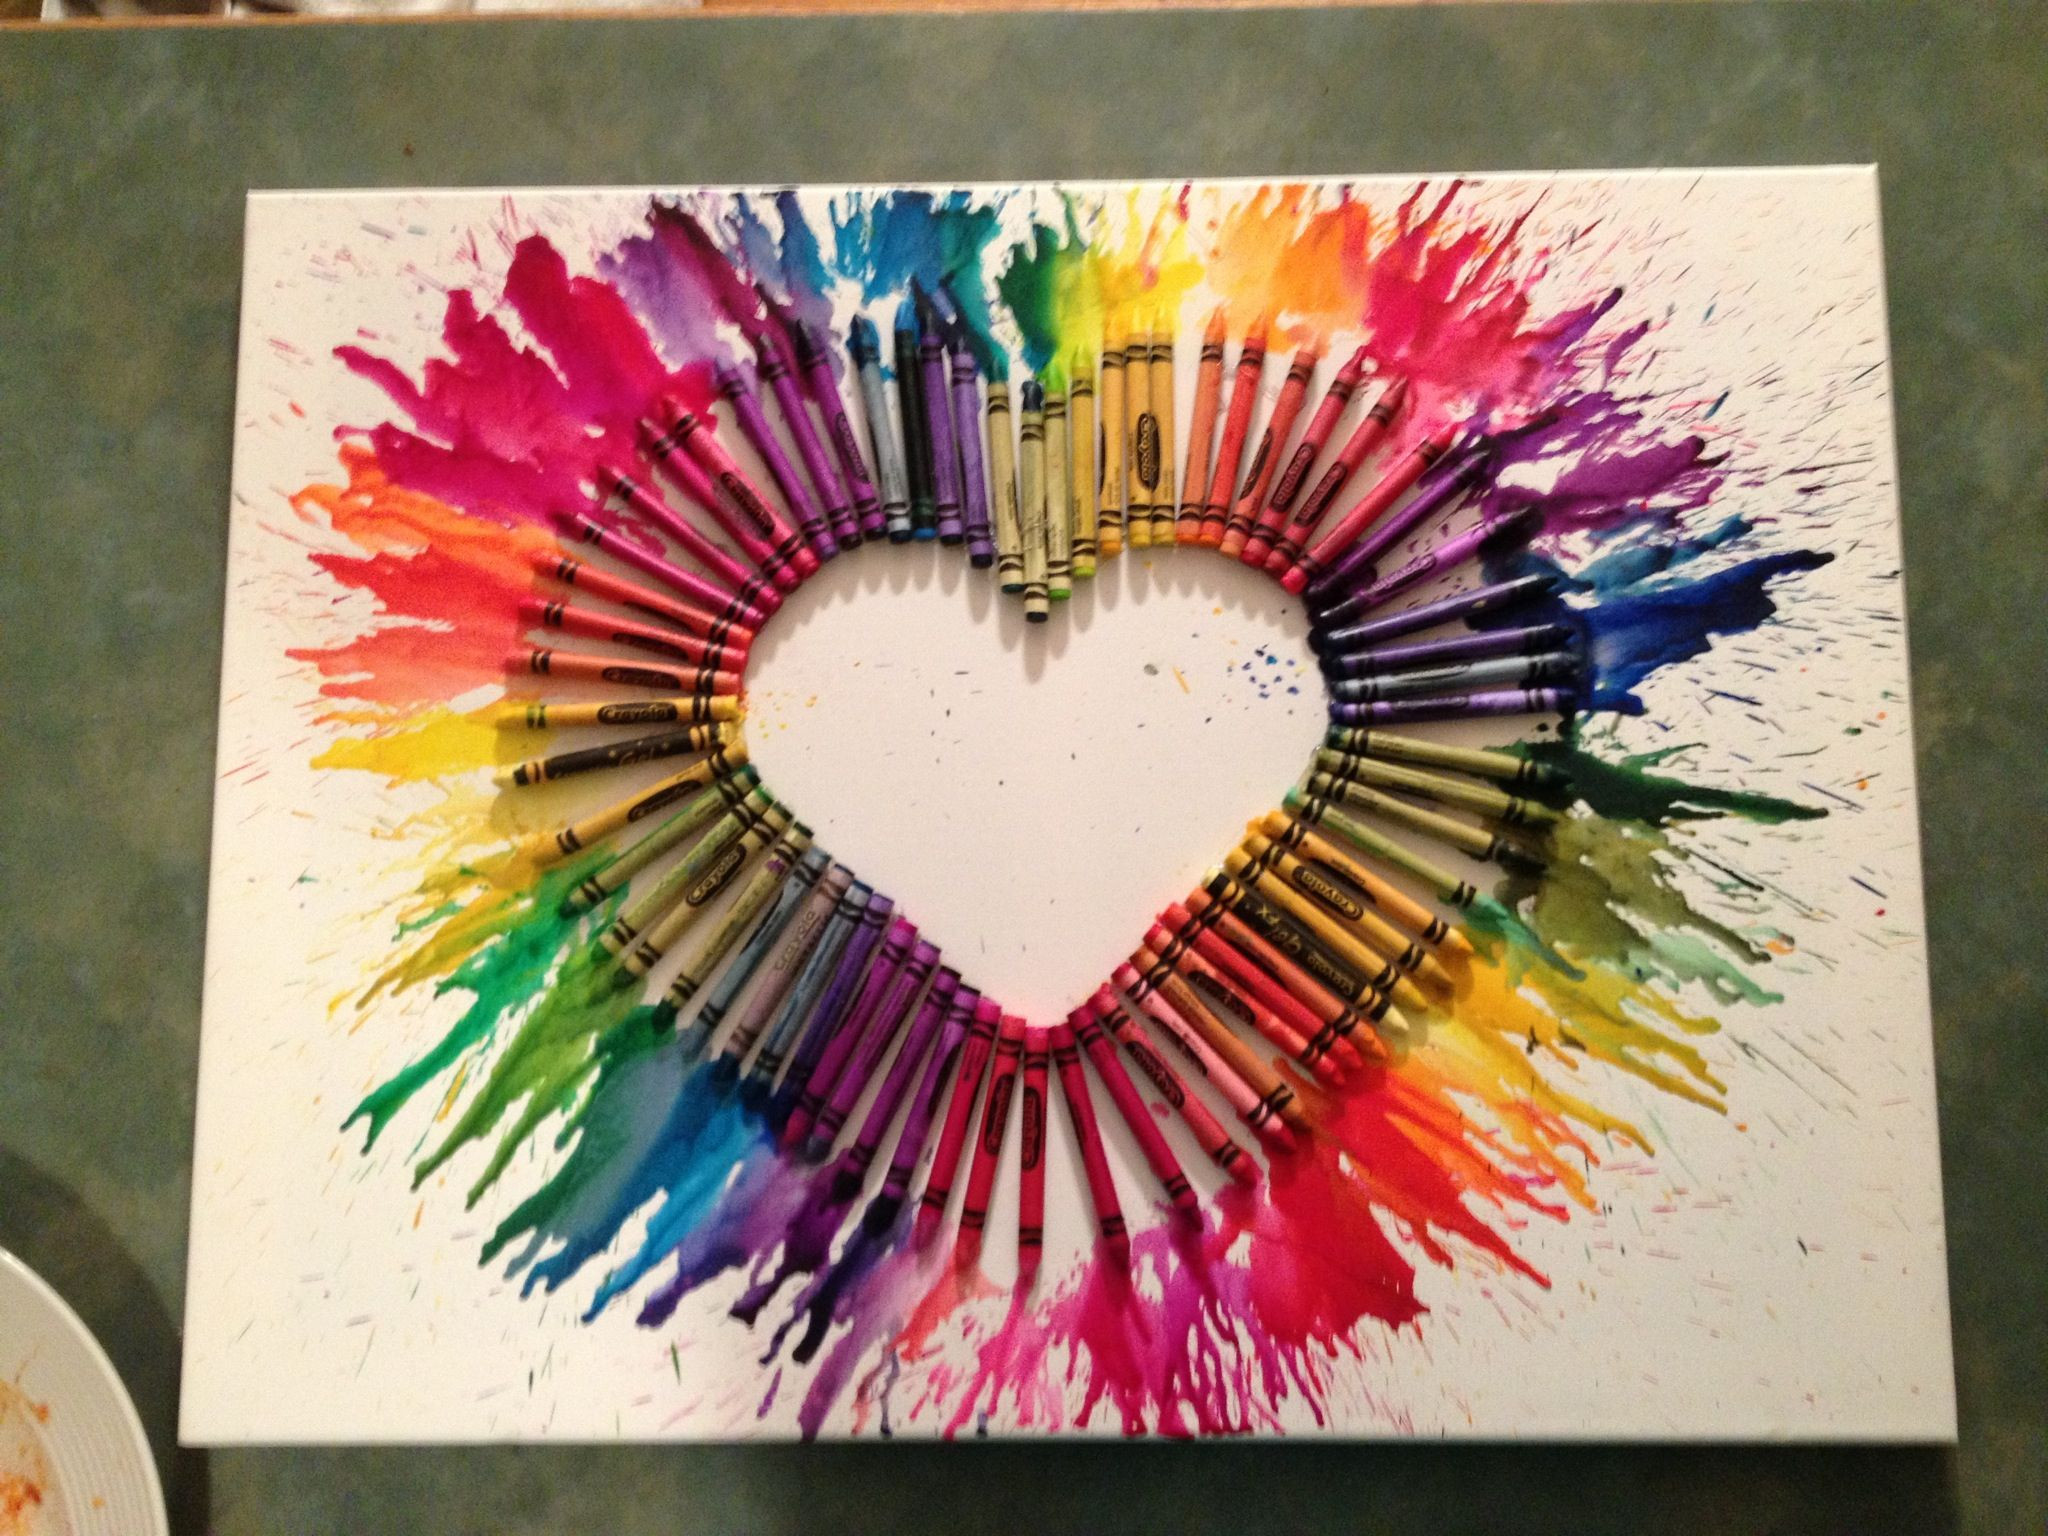 Arts And Crafts Activities For Adults
 Crayon art Arts and crafts project